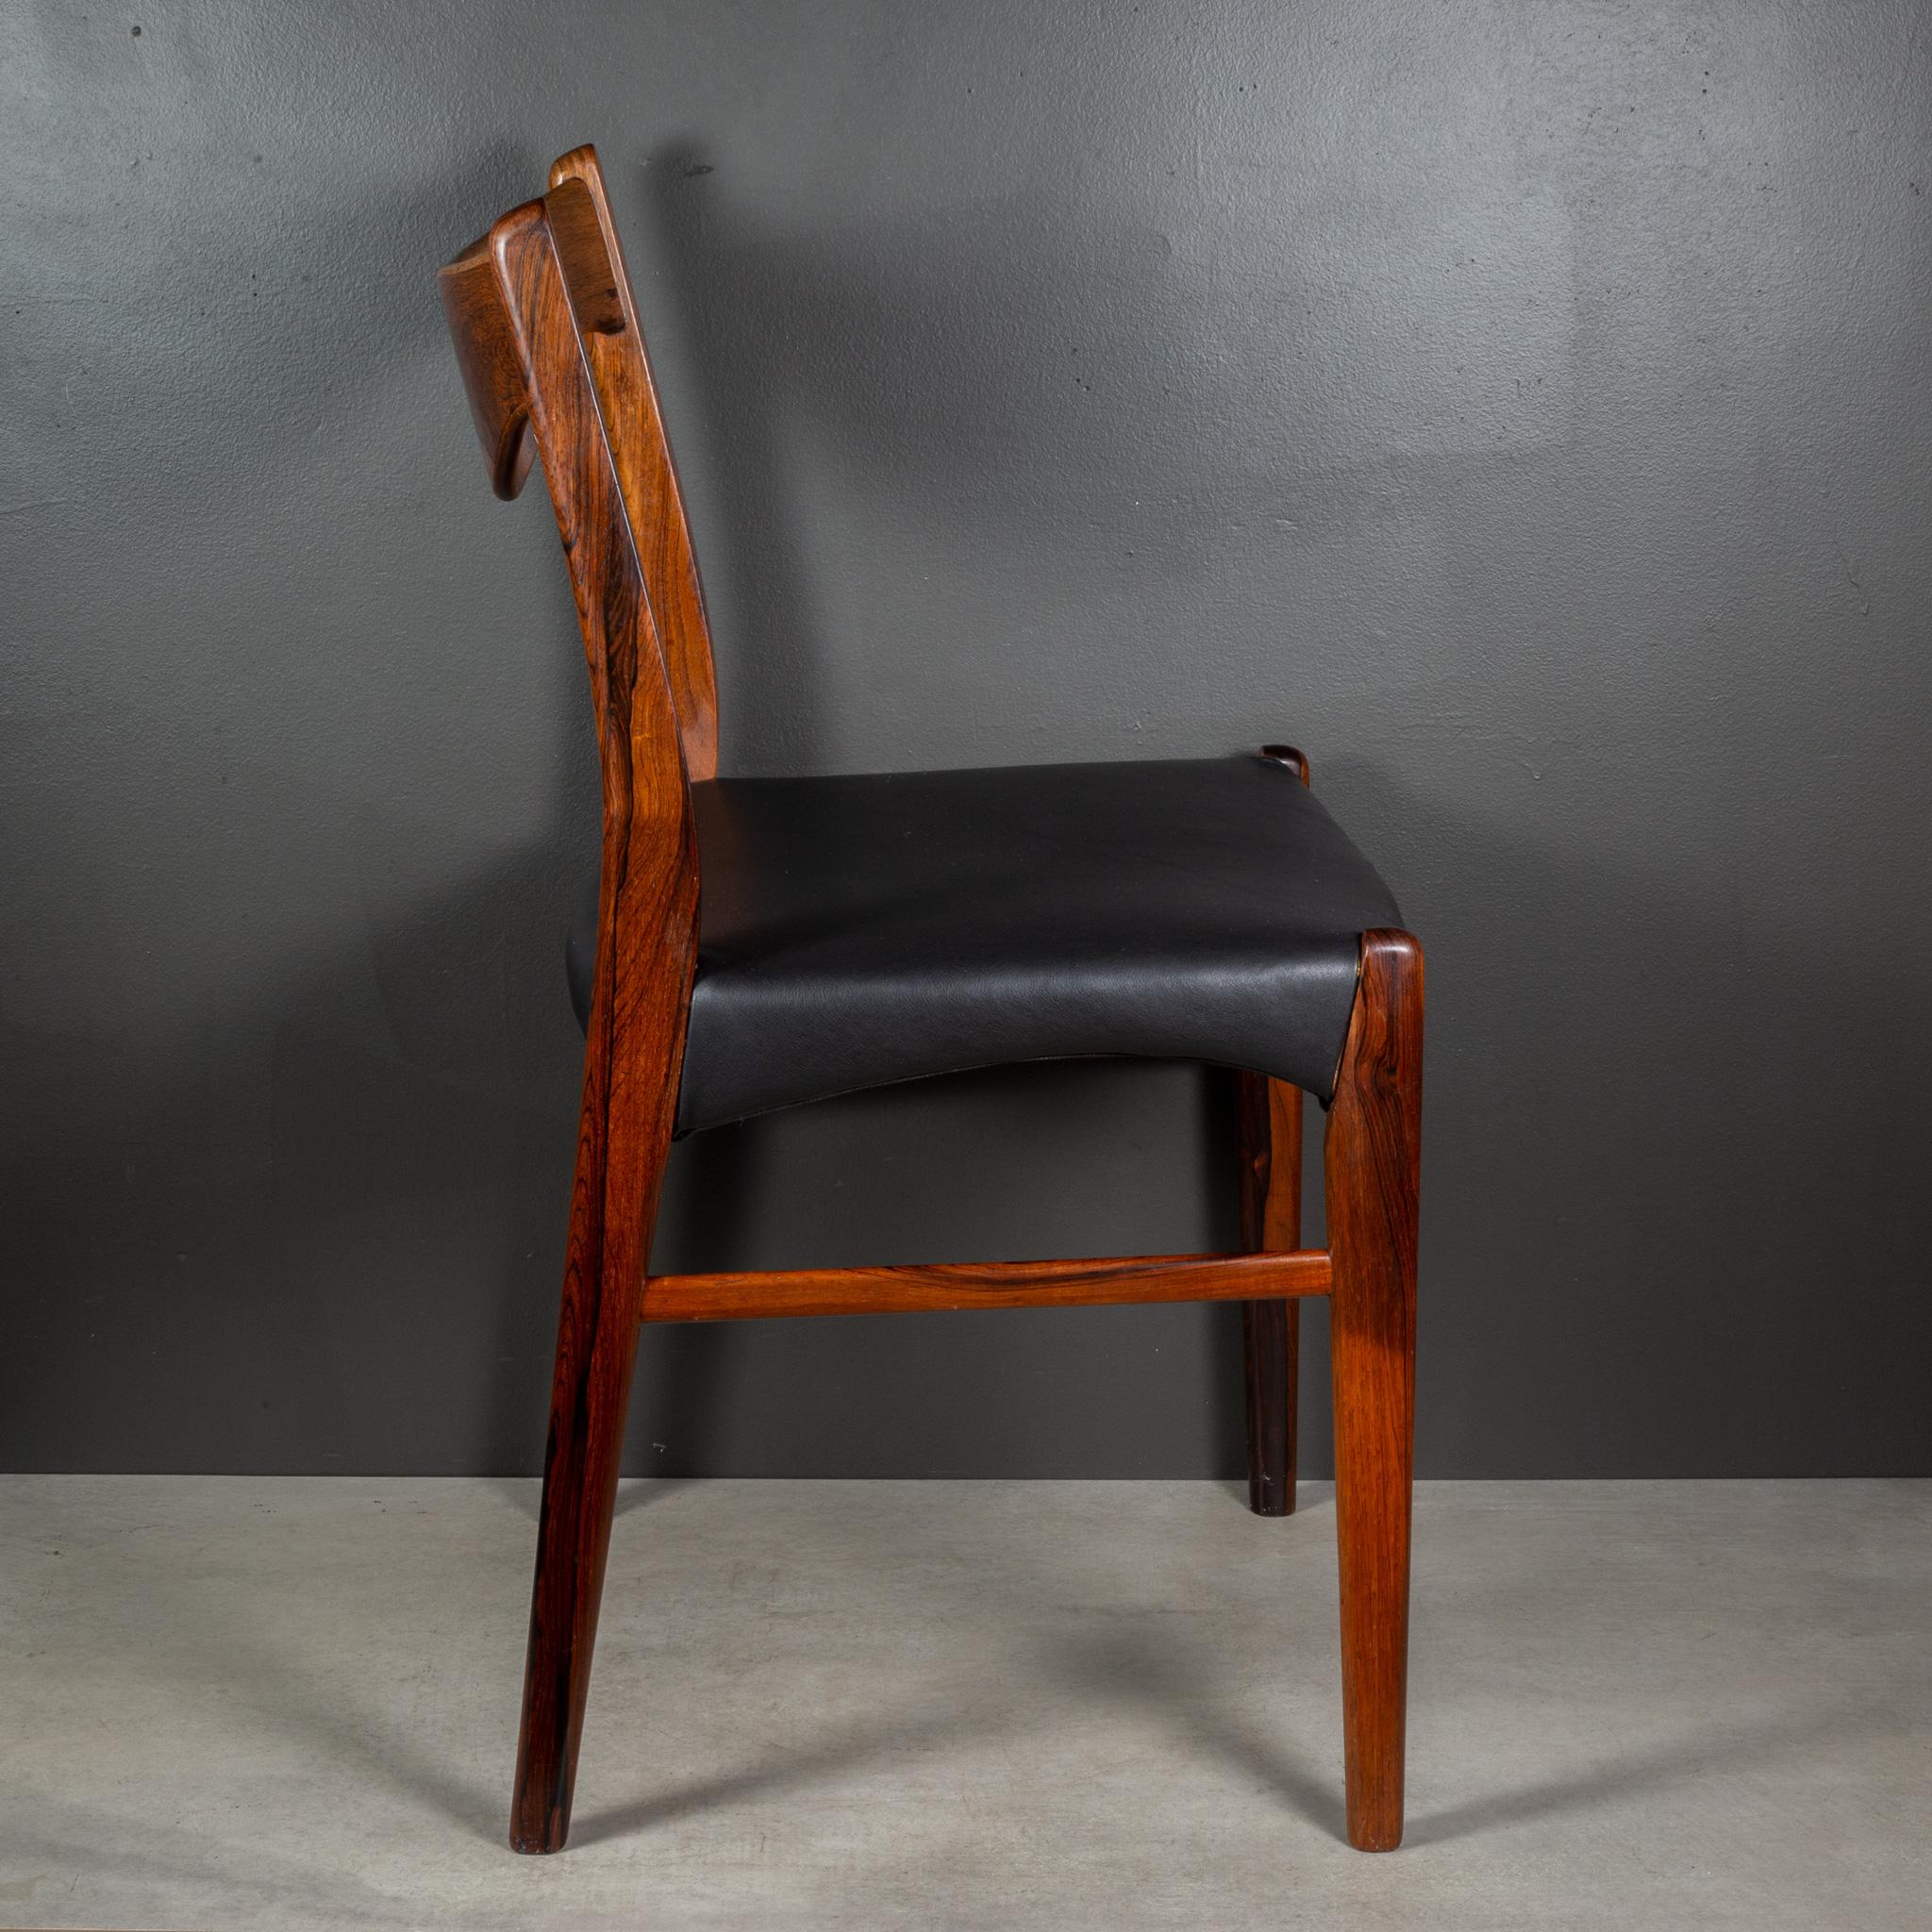 20th Century Arne Wahl Iversen Model GS61 Rosewood and Leather Dining Chairs c.1950 For Sale